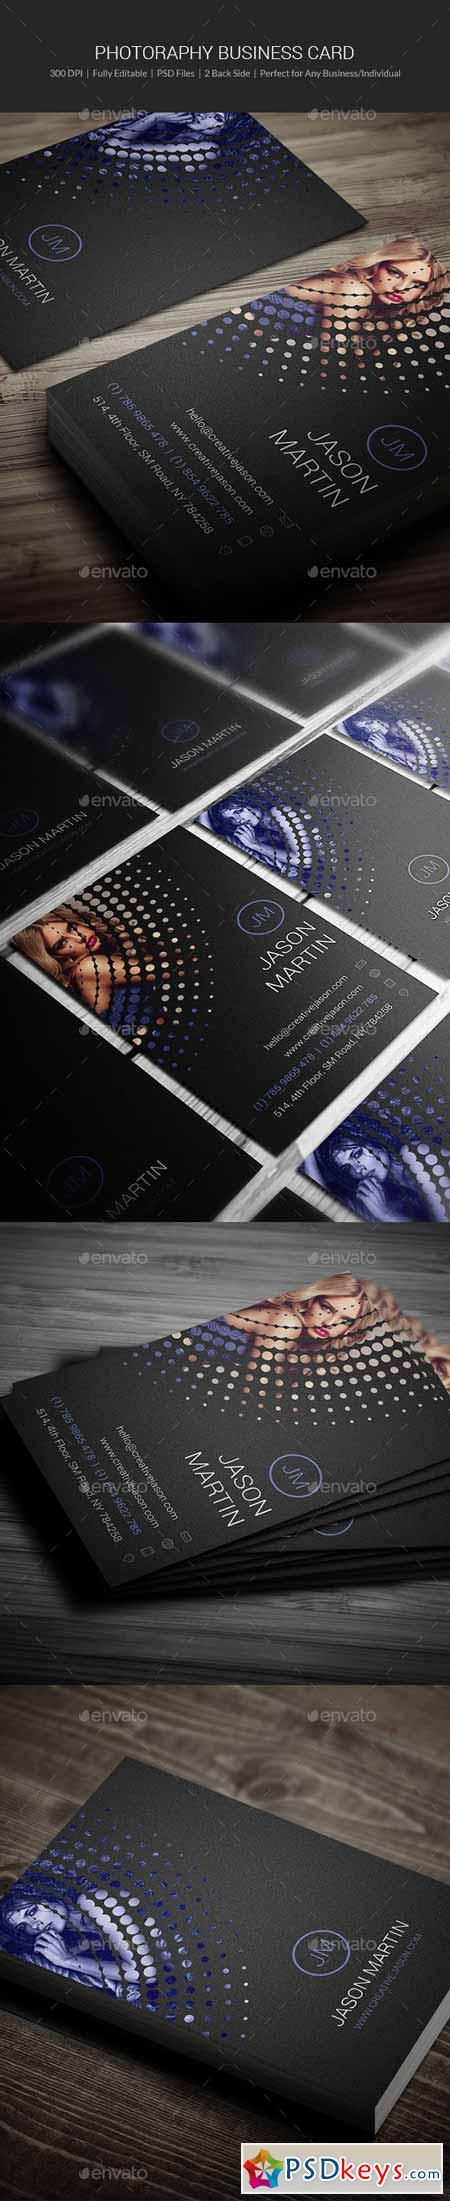 Photography Business Card - 10 11626778